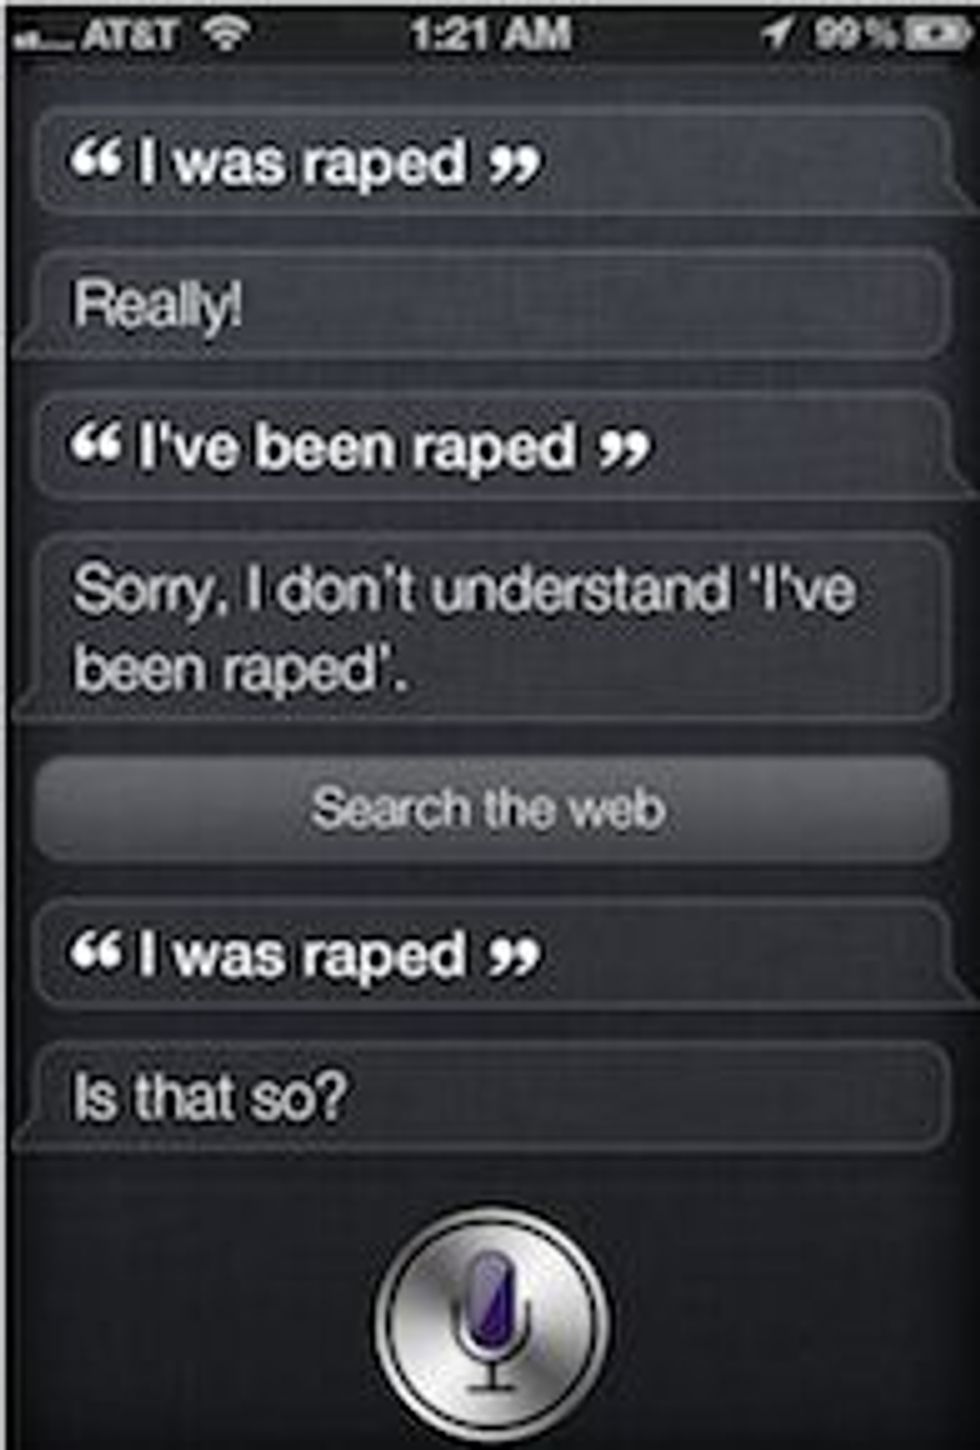 Apple iPhone Censoring Birth Control, Help For Rape Victims